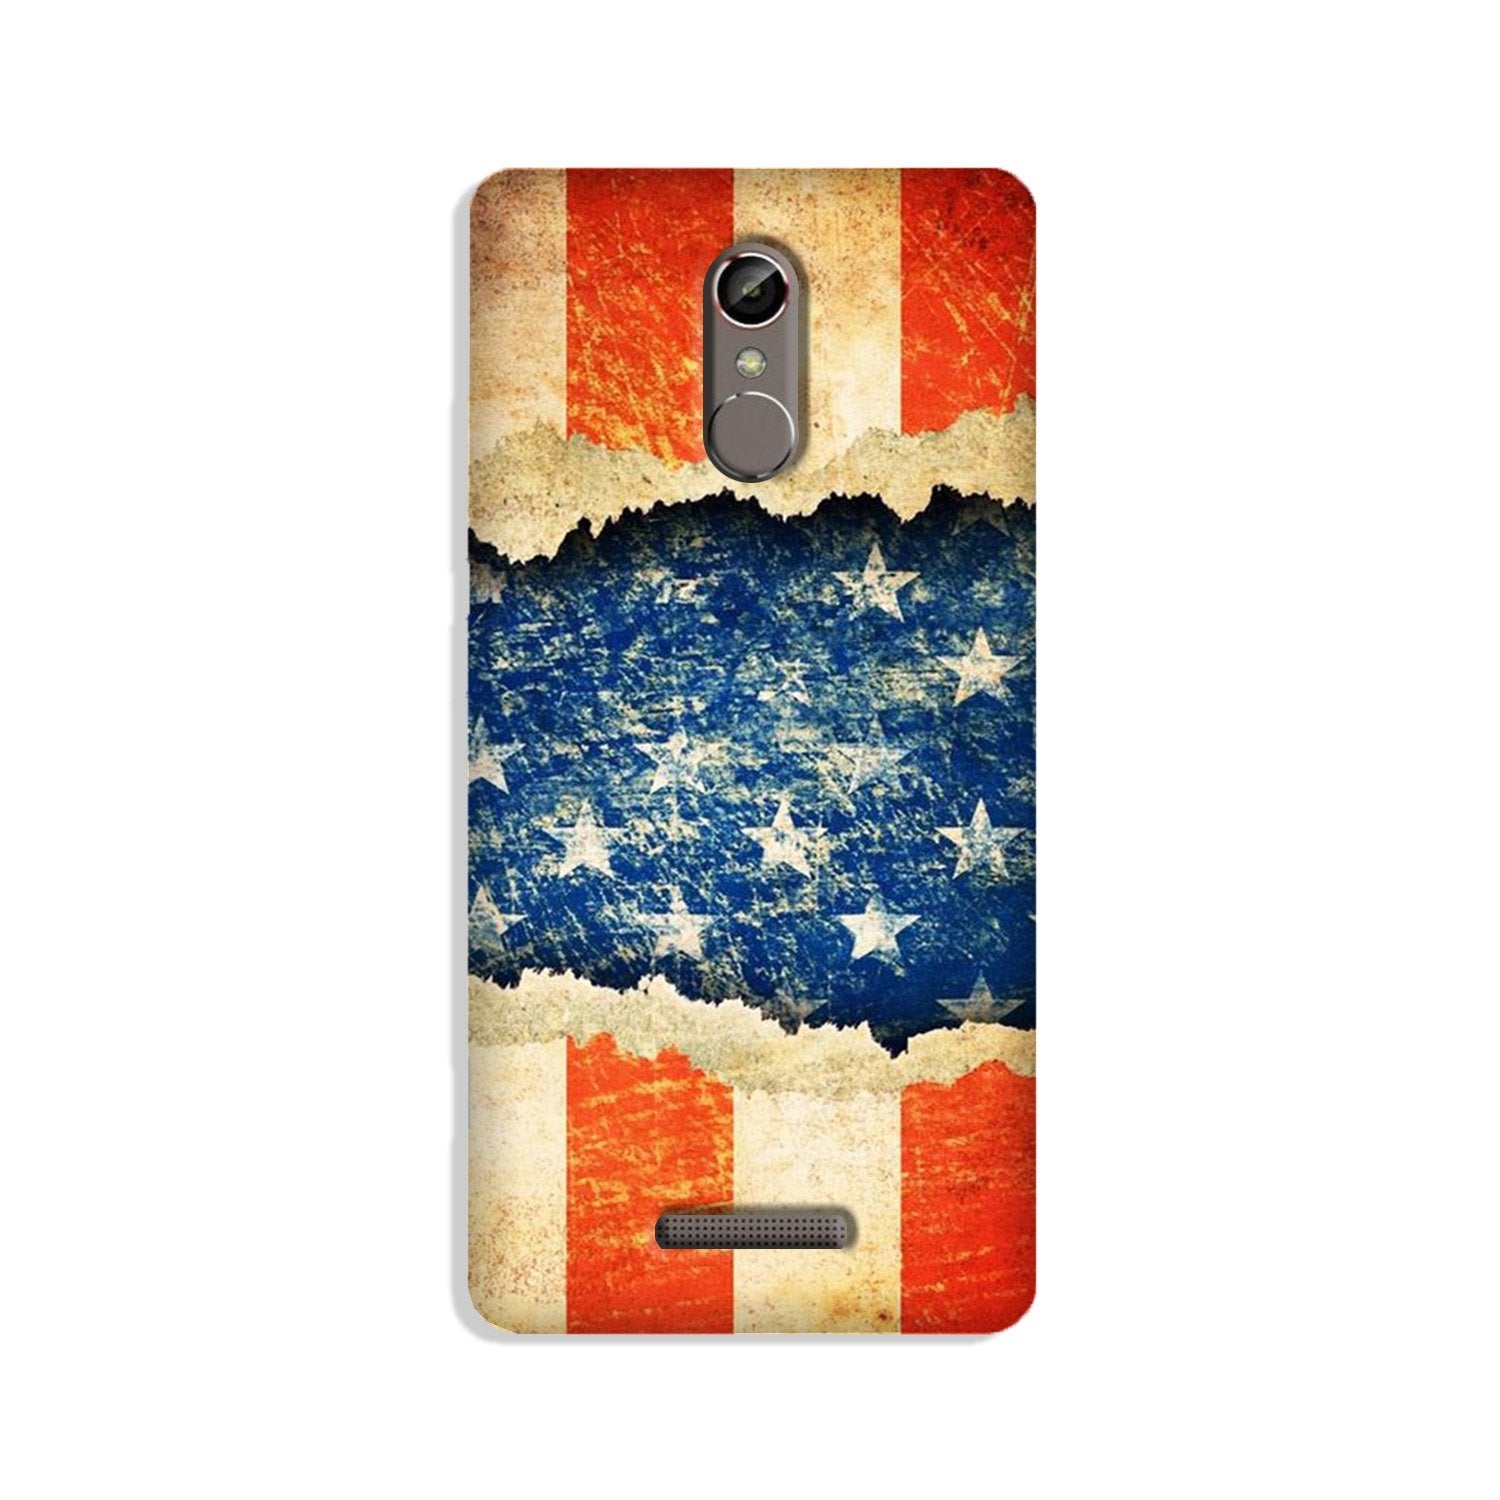 United Kingdom Case for Gionee S6s